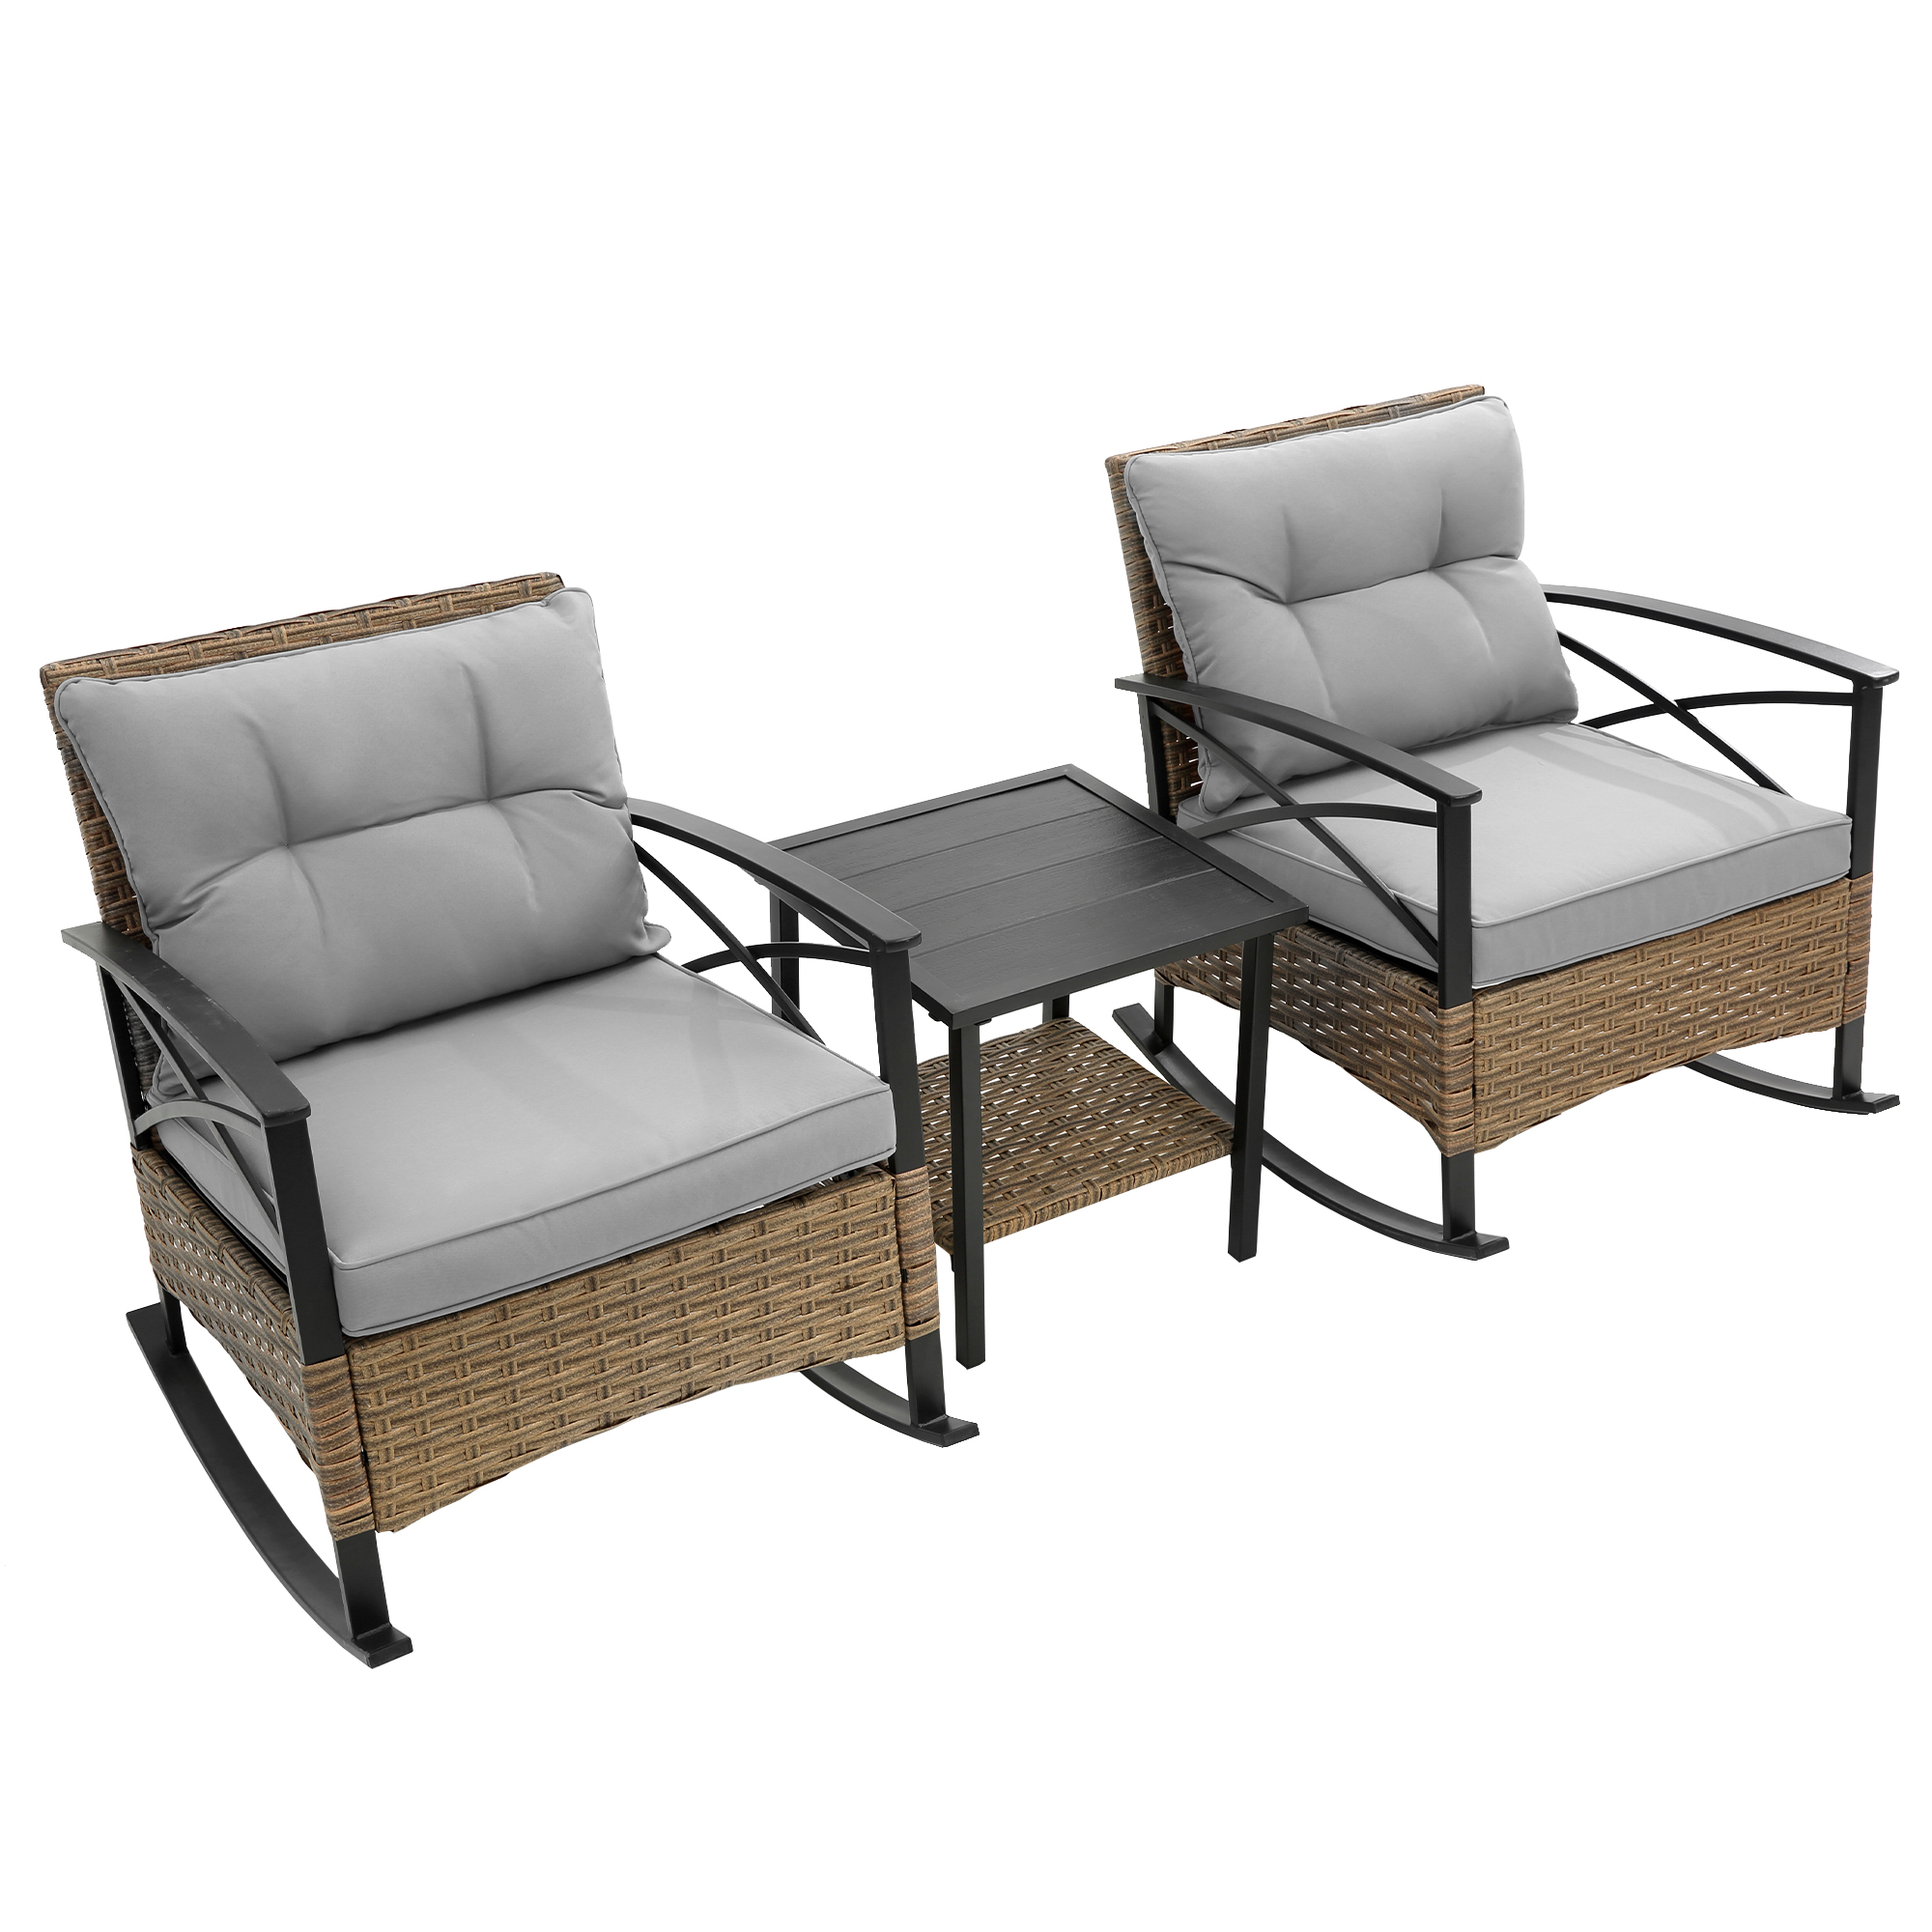 HOMEFUN 3-Piece Rocking Chair Lounge Set Outdoor Rattan Rocking Chair Grey Set (1 Wicker Table And 2 Chairs), Outdoor Rattan Sofa With Grey Cushions, Rockable Seat Bottom Set - image 1 of 8